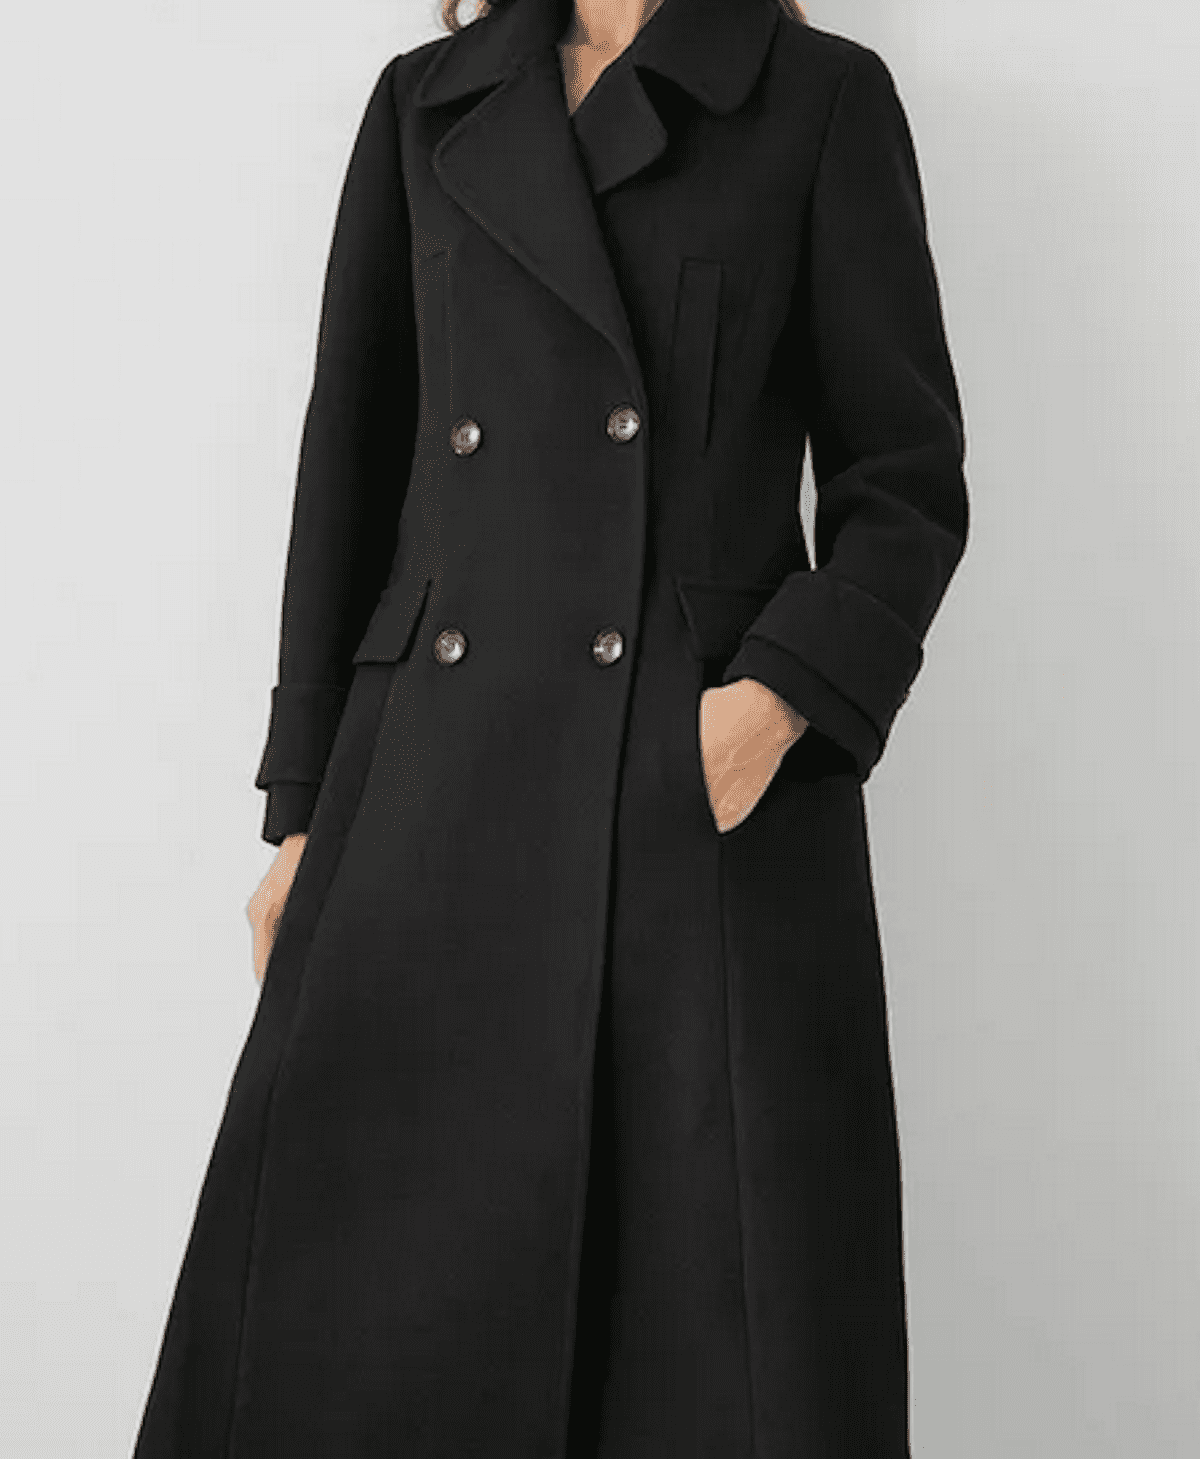 Black long line double breasted wool coat modelled against a grey background. Women's party wear